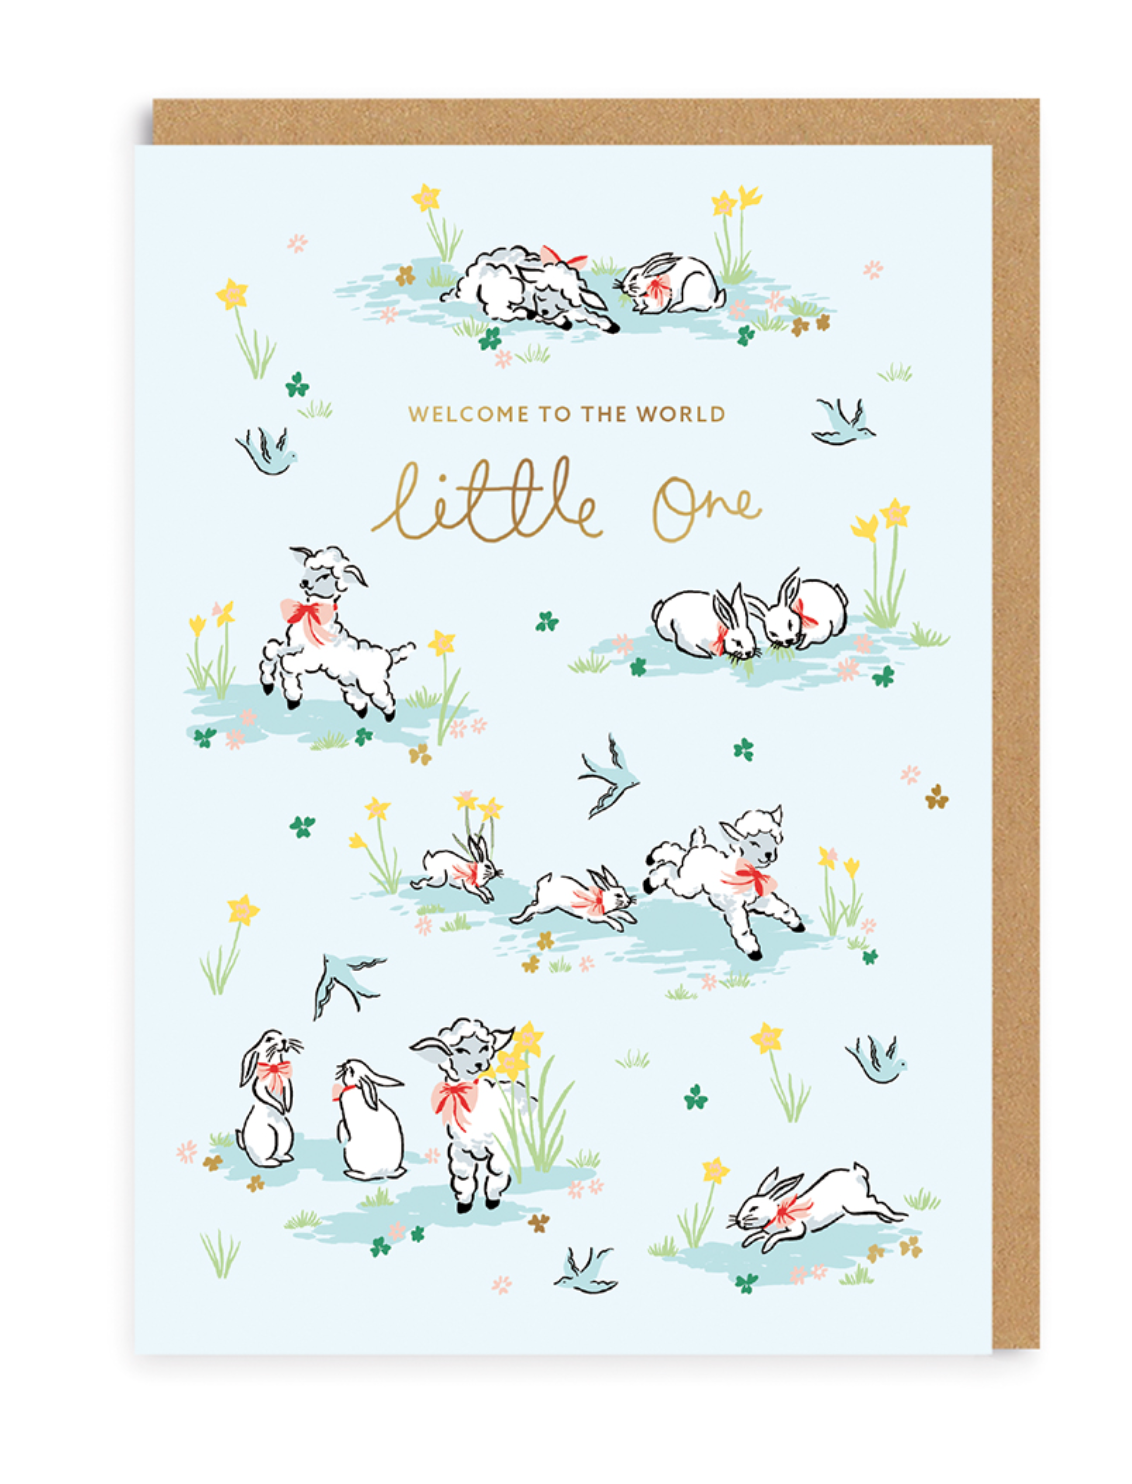 Welcome to the World Greeting Card